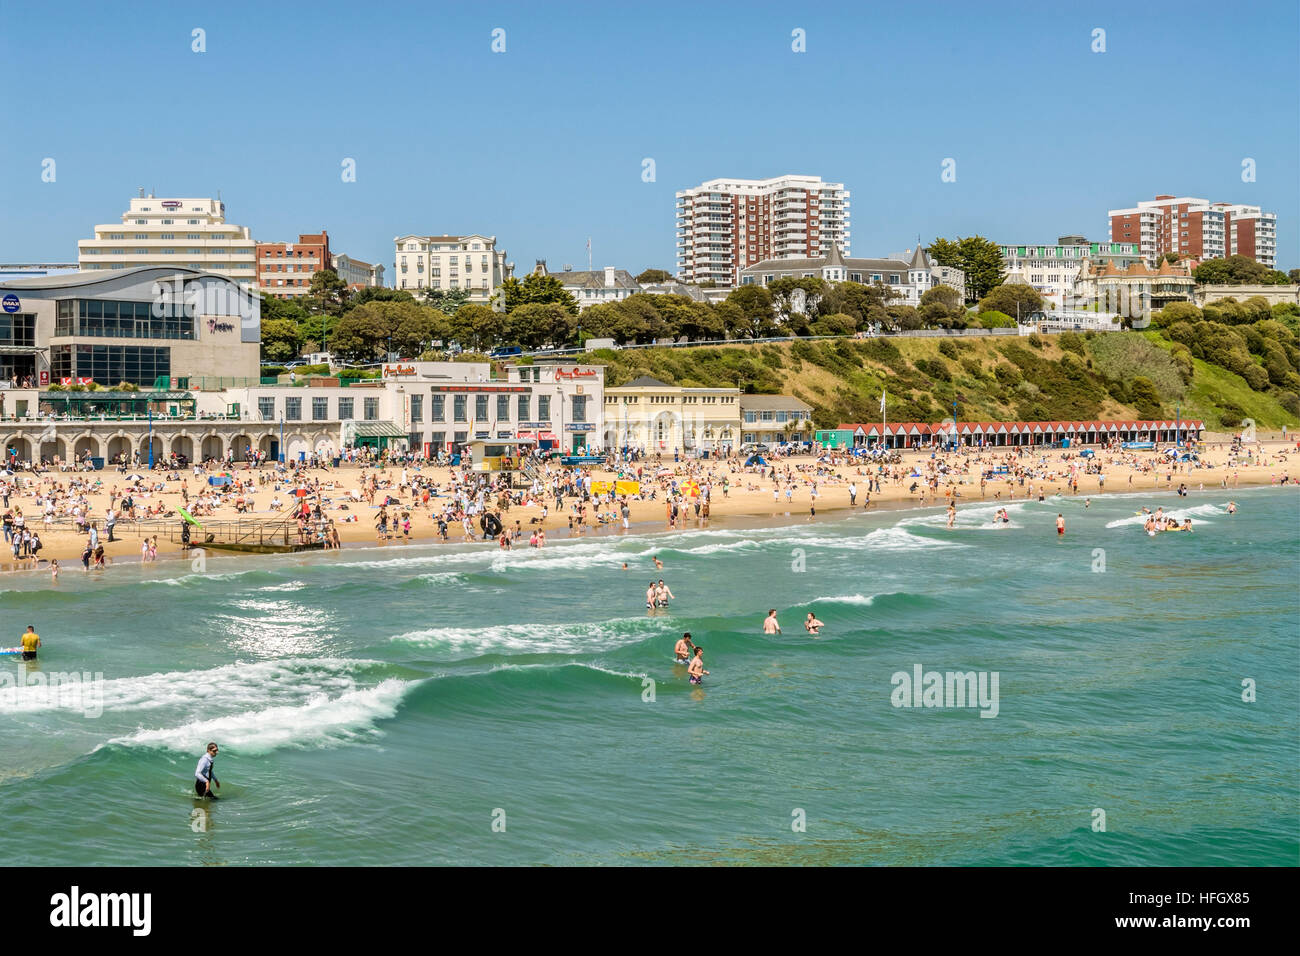 Tourists at the beach of the holiday resort Bournemouth, Dorset, South England Stock Photo